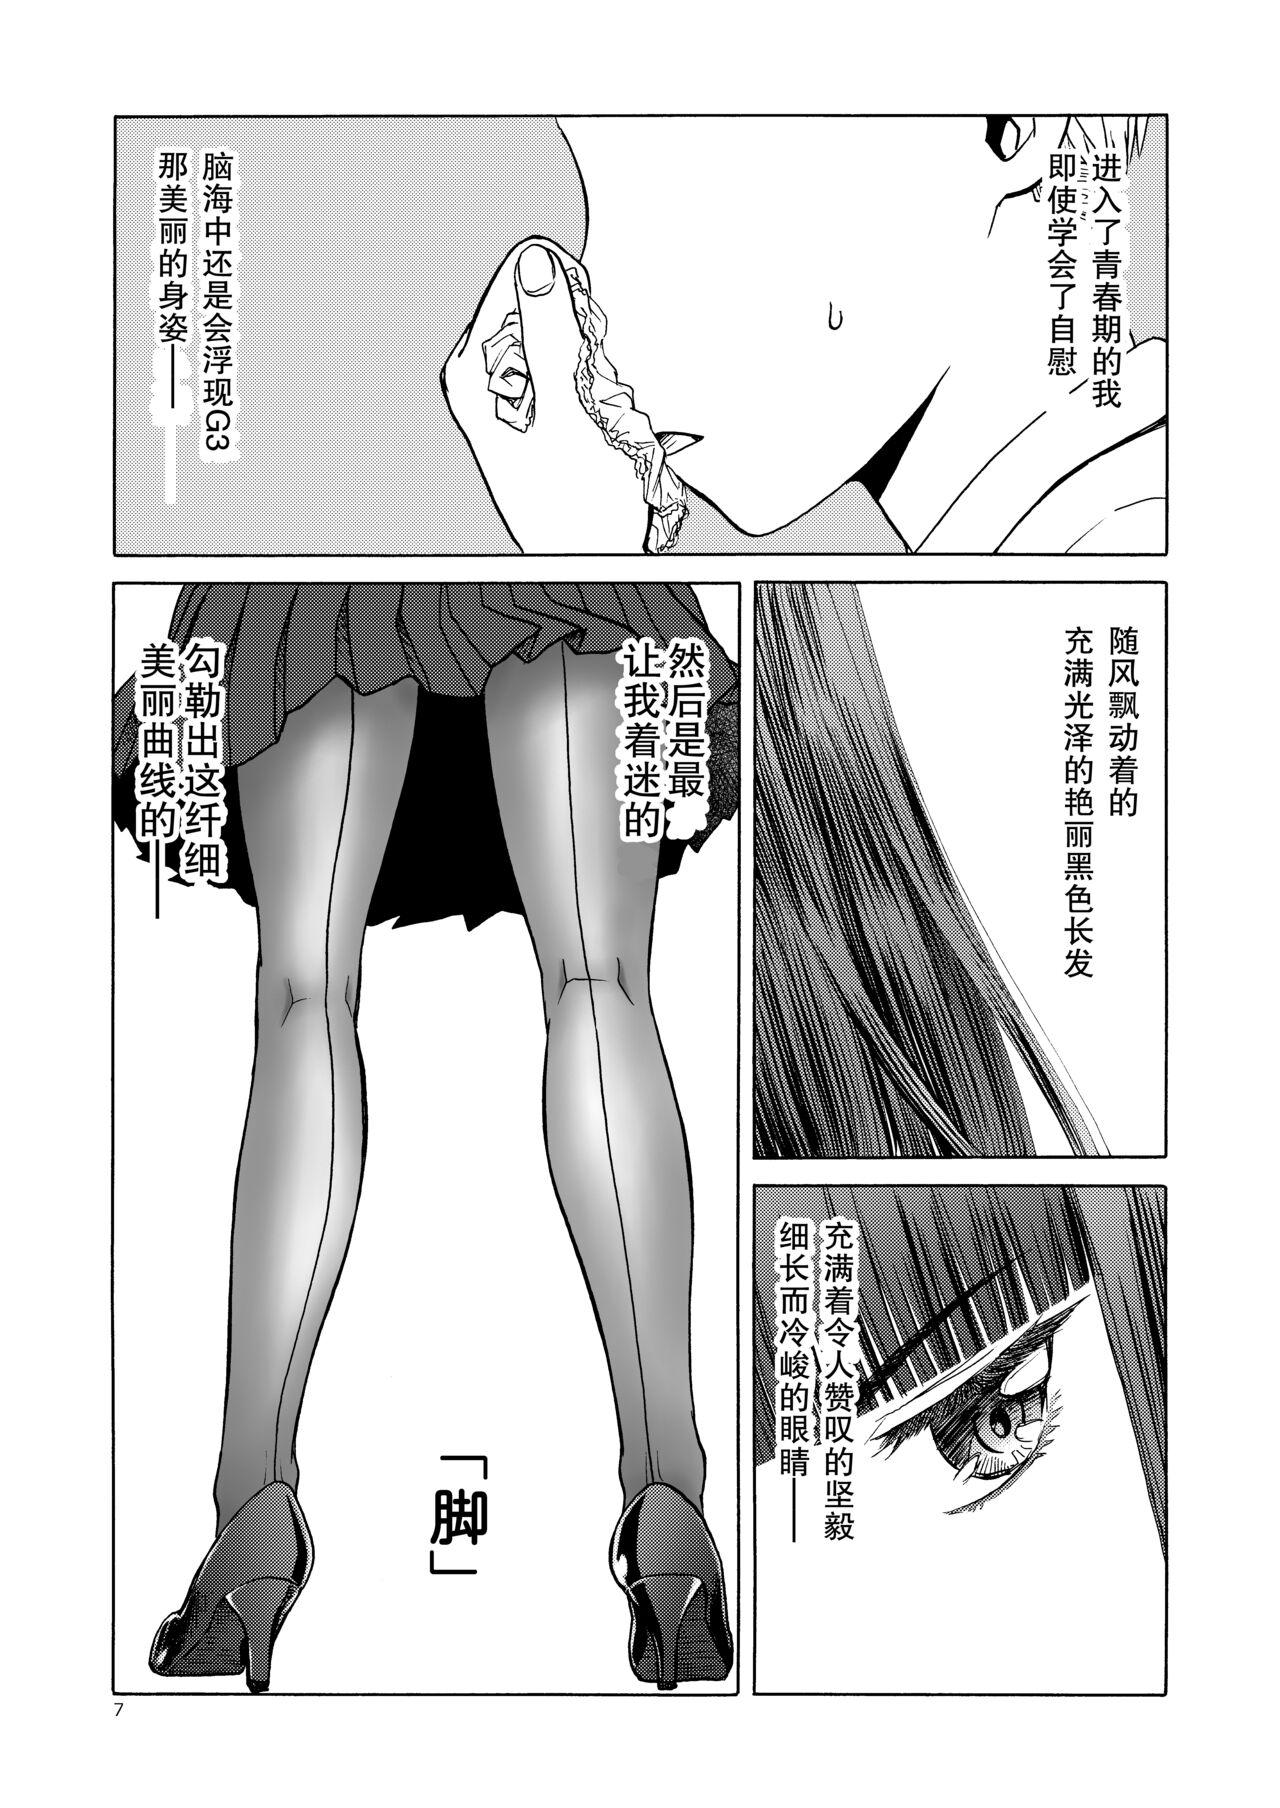 Pale P.T.A. PanSto Tights Ashi - Upotte Officesex - Page 8